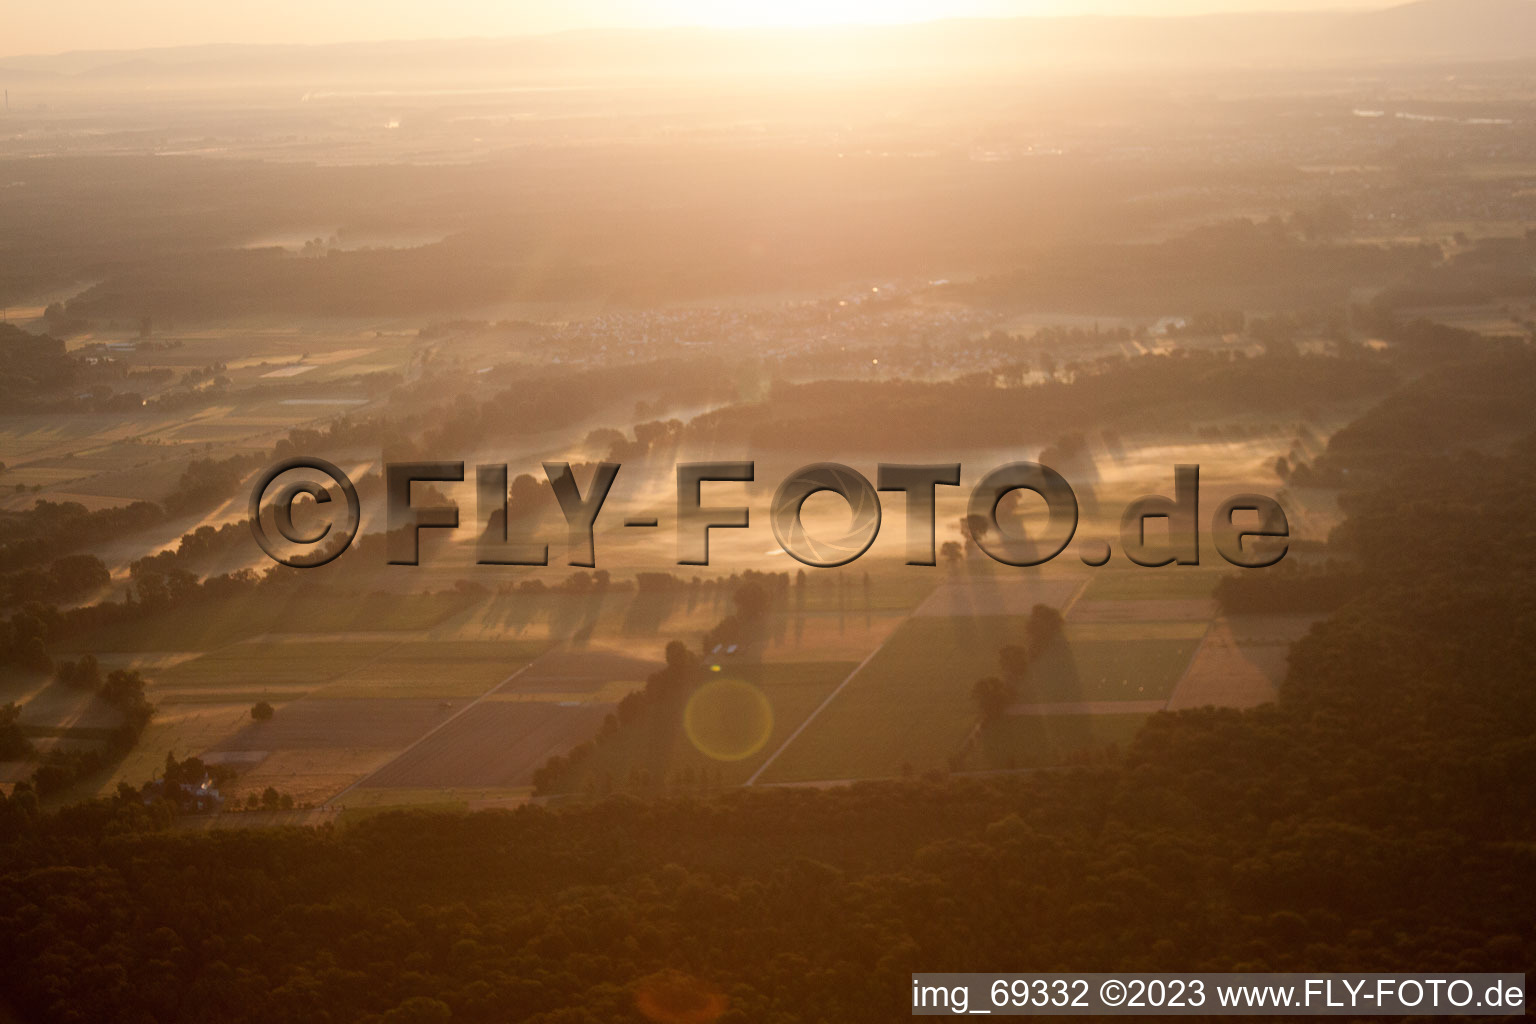 Drone image of Gommersheim in the state Rhineland-Palatinate, Germany